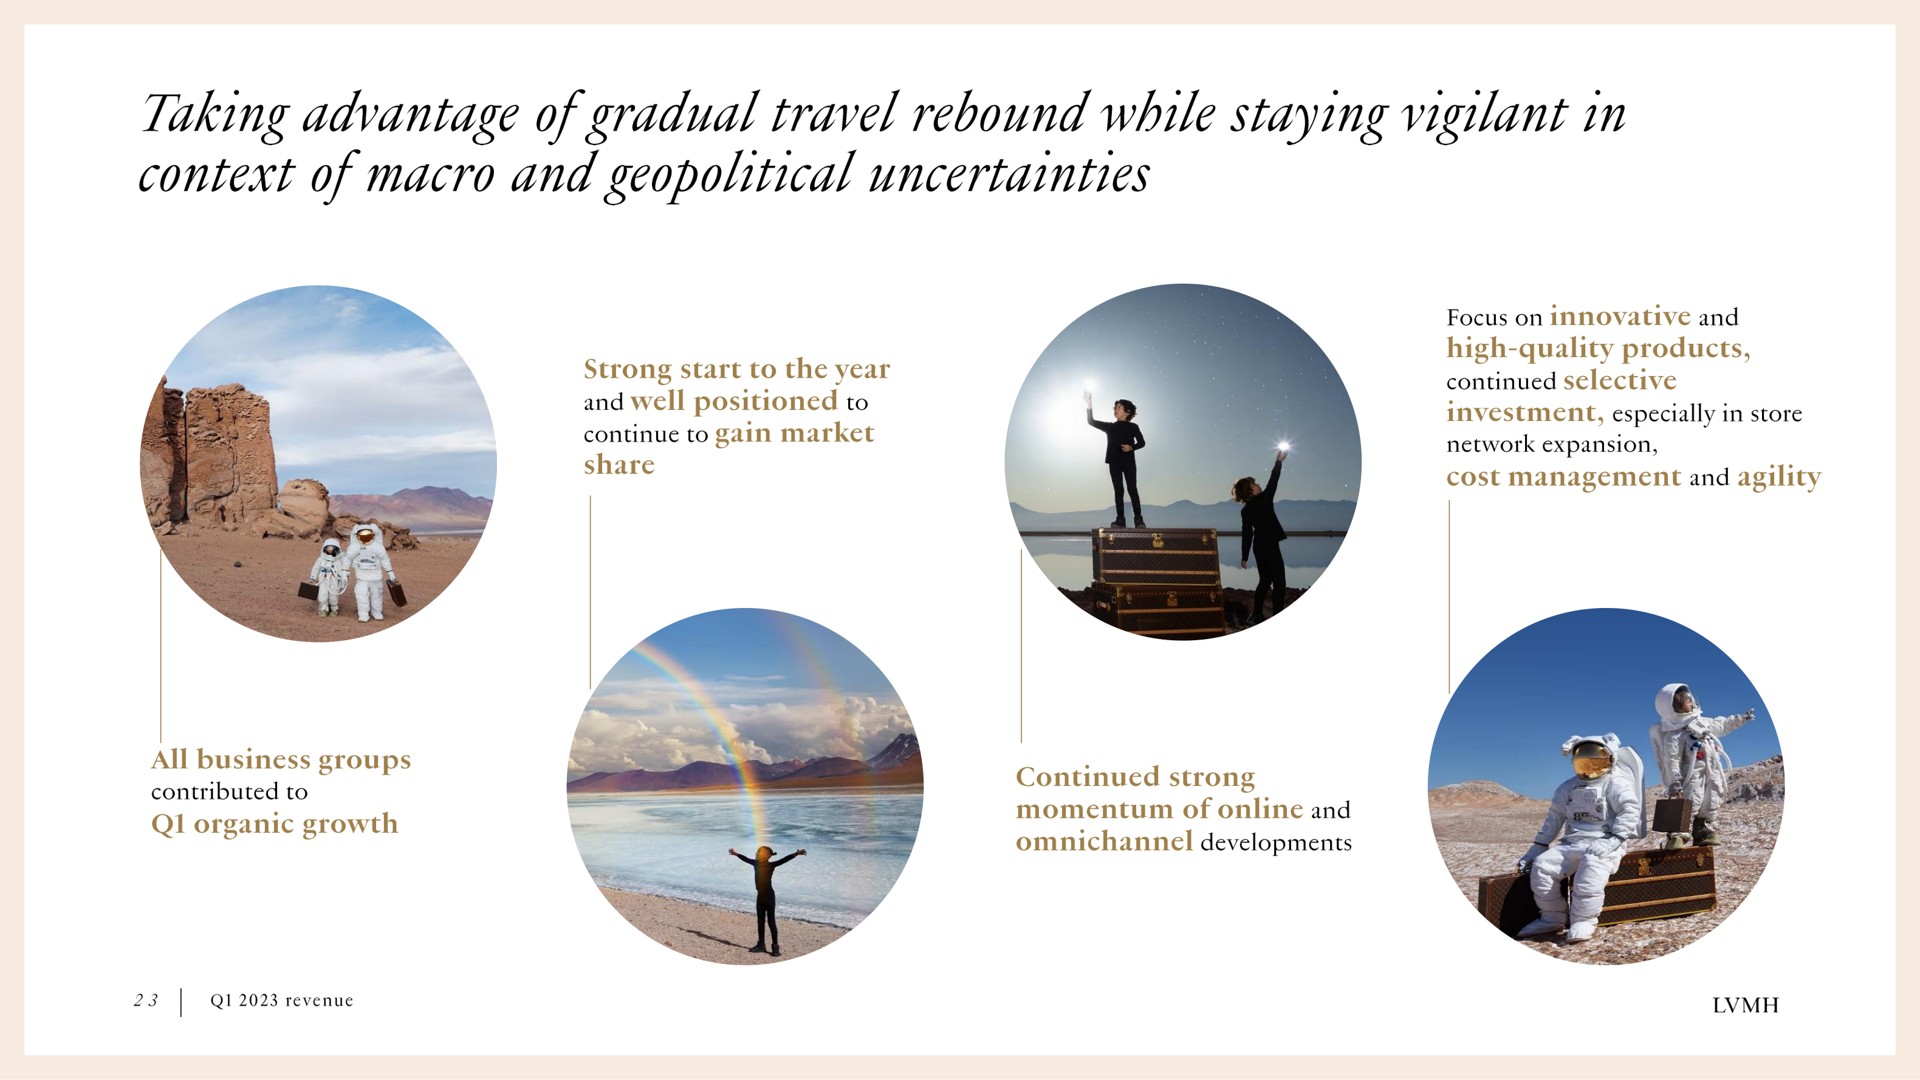 taking advantage of gradual travel rebound while staying vigilant in context of macro and geopolitical uncertainties | LVMH